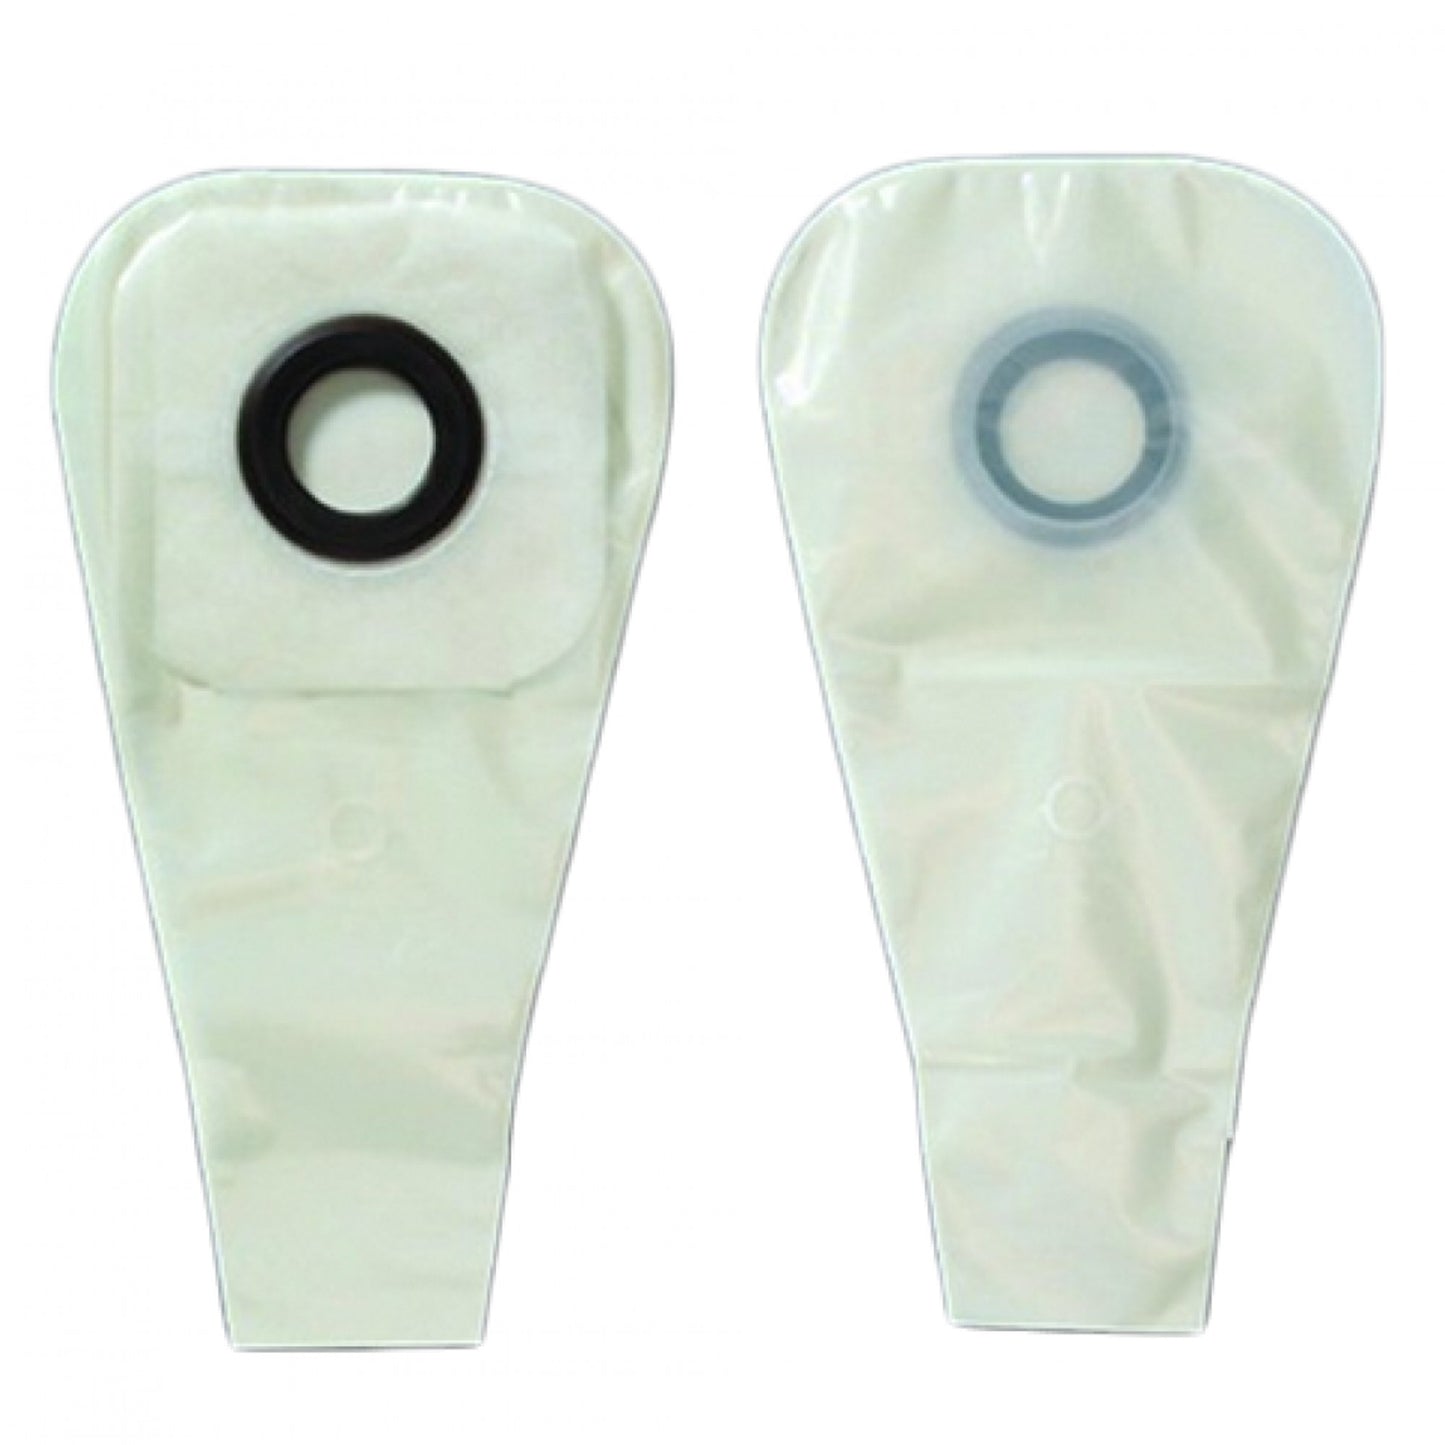 Karaya 5 One-Piece Drainable Transparent Colostomy Pouch, 12 Inch Length, 2 Inch Stoma, 30 ct